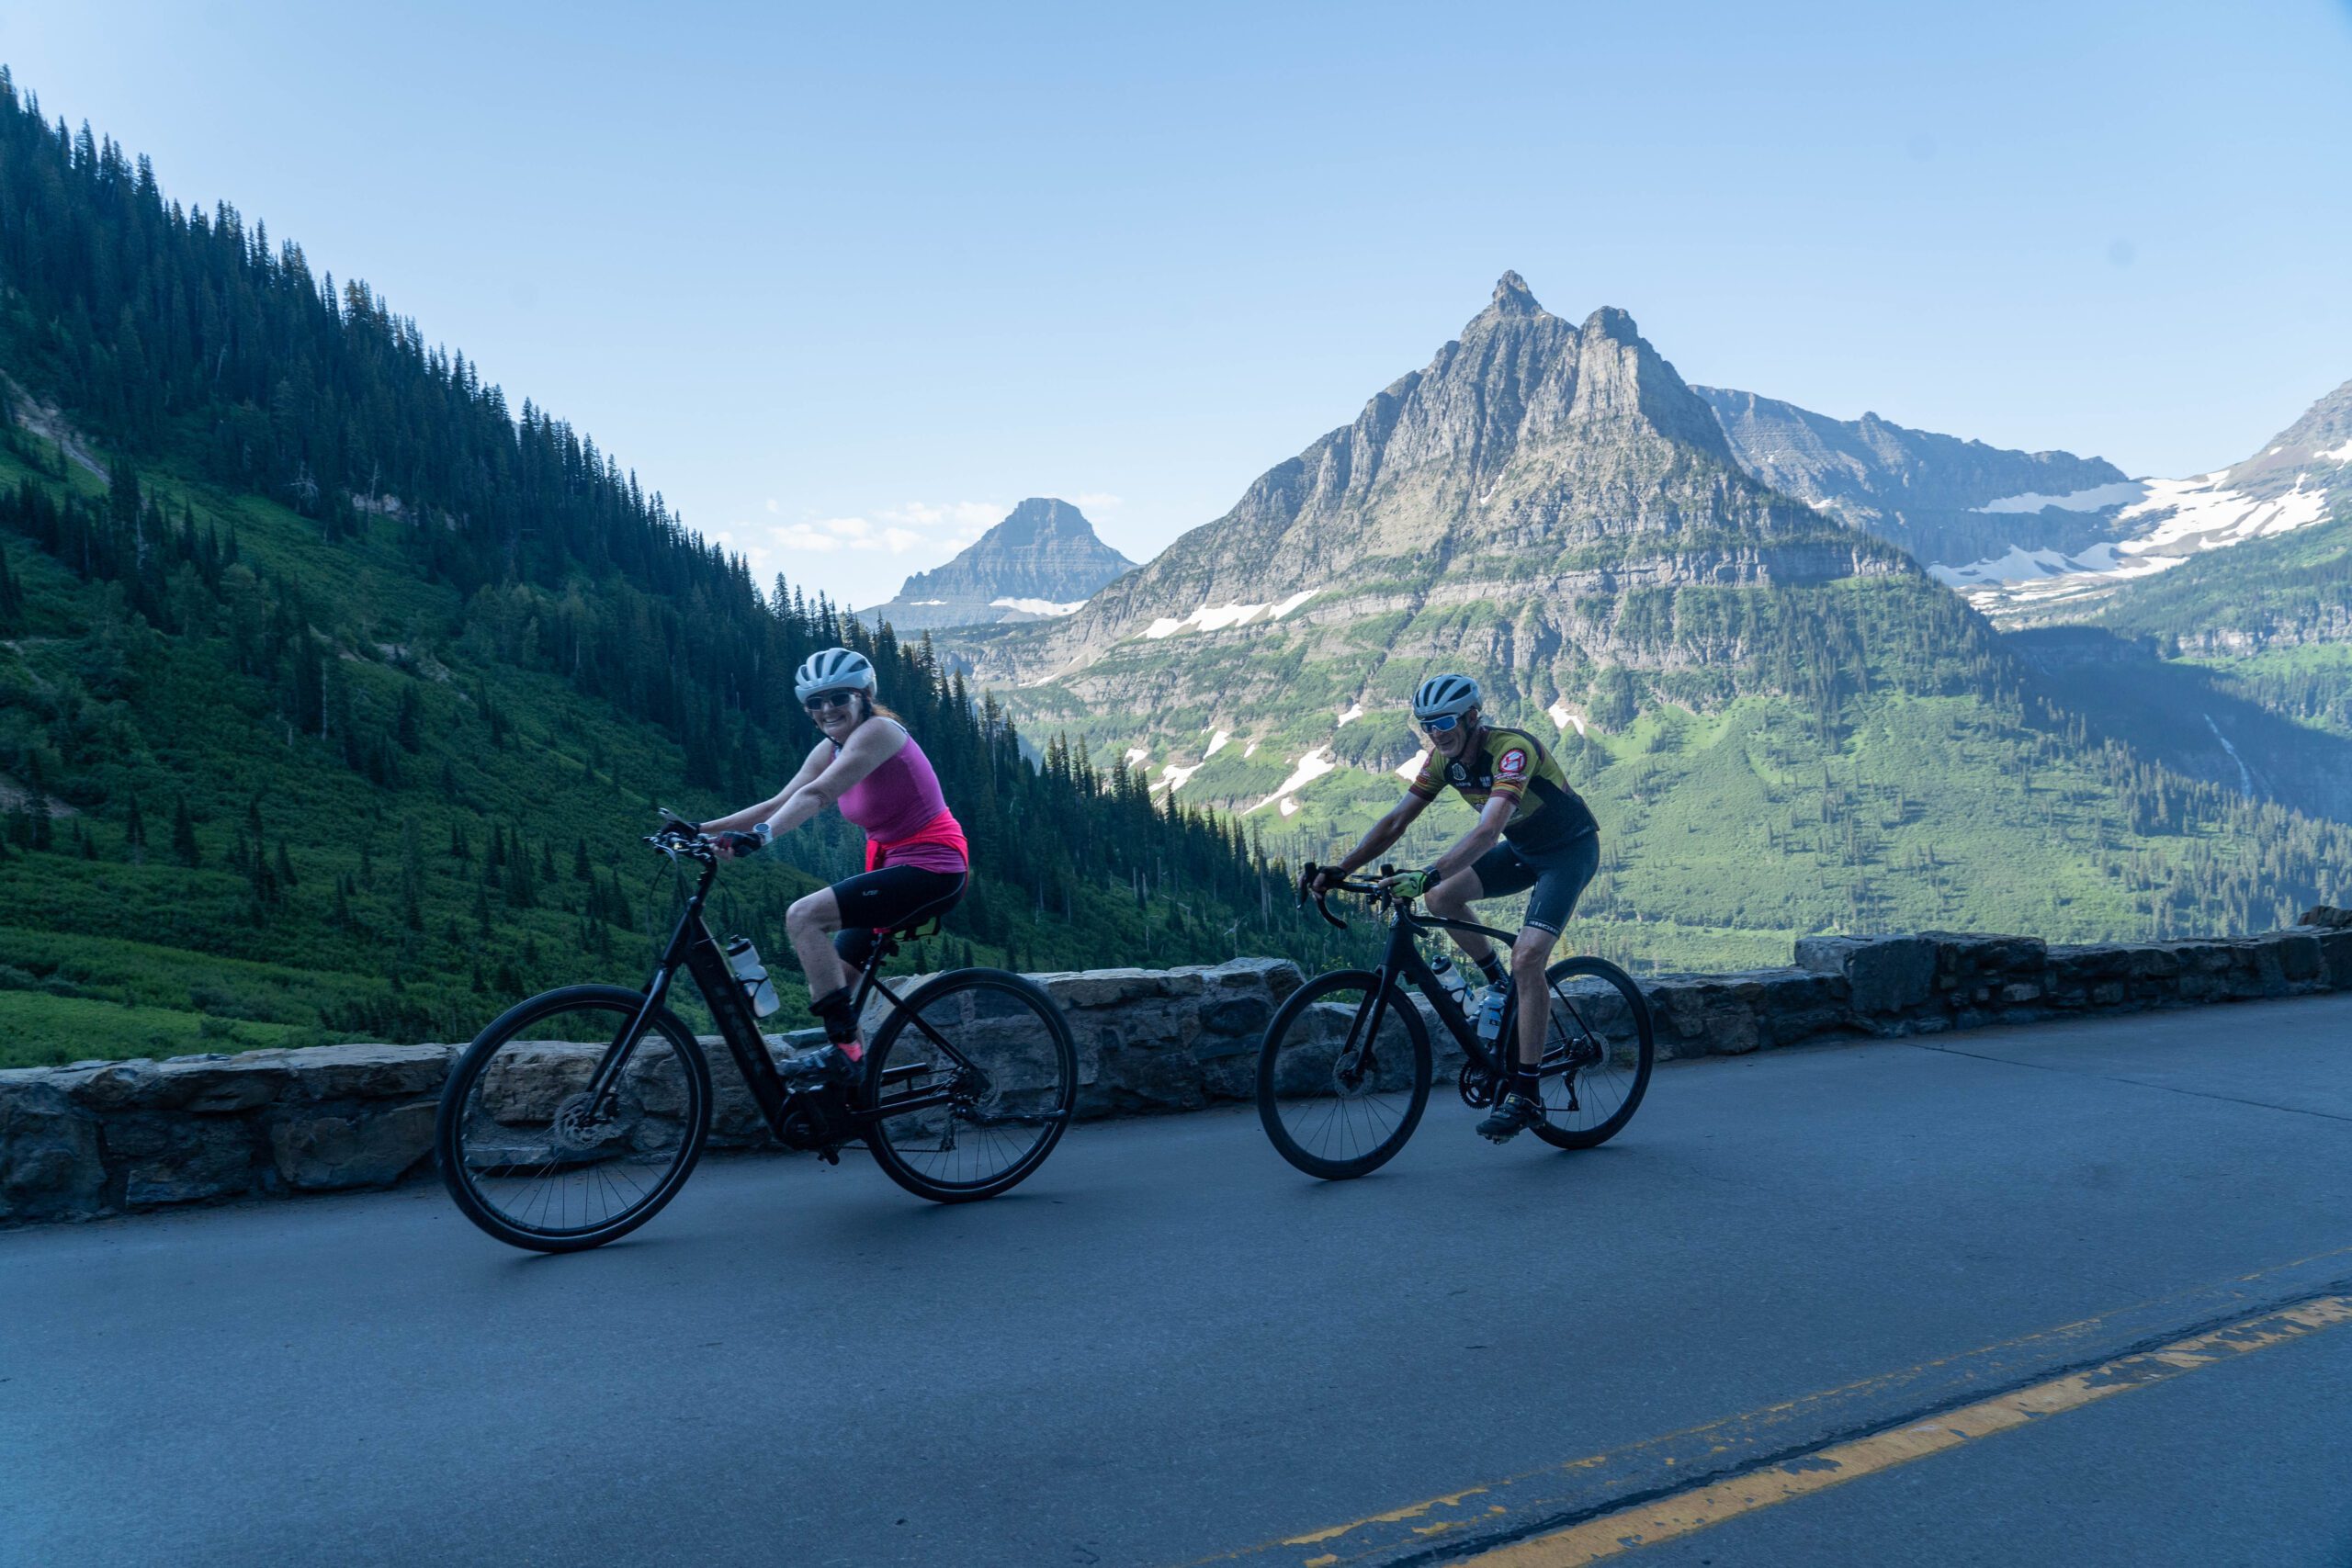 Two cyclists ride 'Going to the Sun' Road together in Glacier National Park